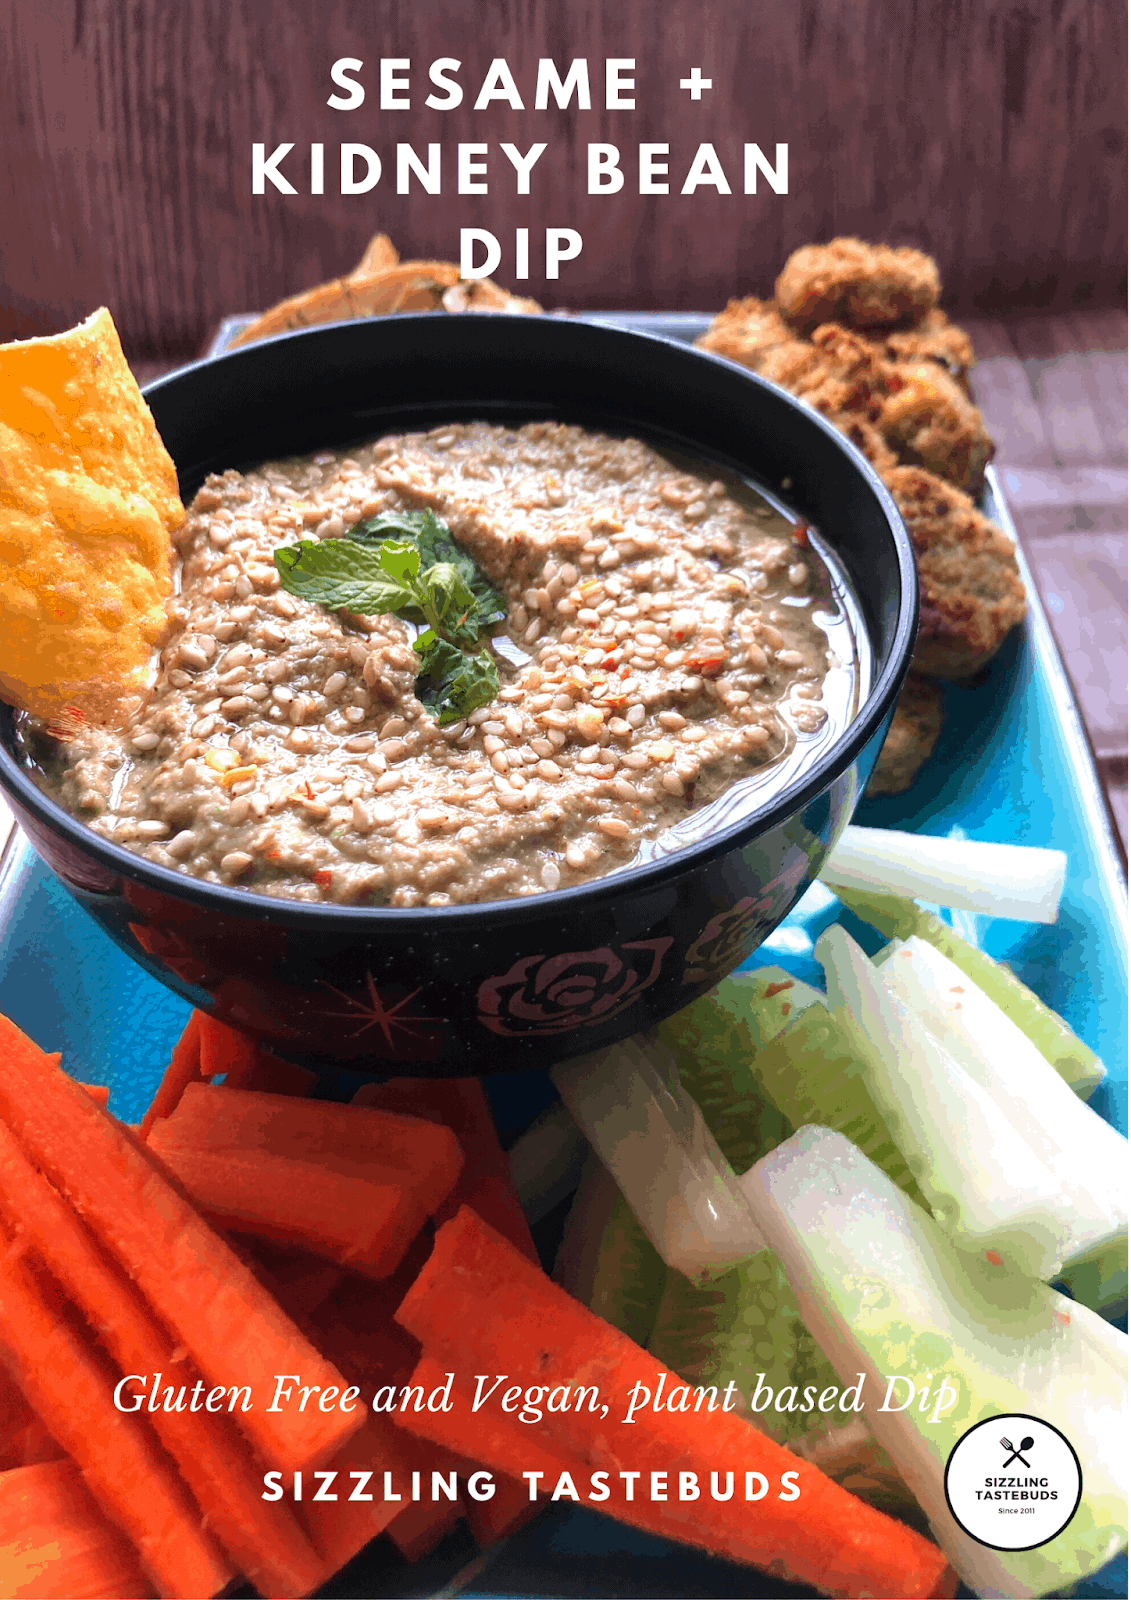 A protein rich Dip made with Kidney beans & roasted sesame seeds. 100% gluten Free and Vegan